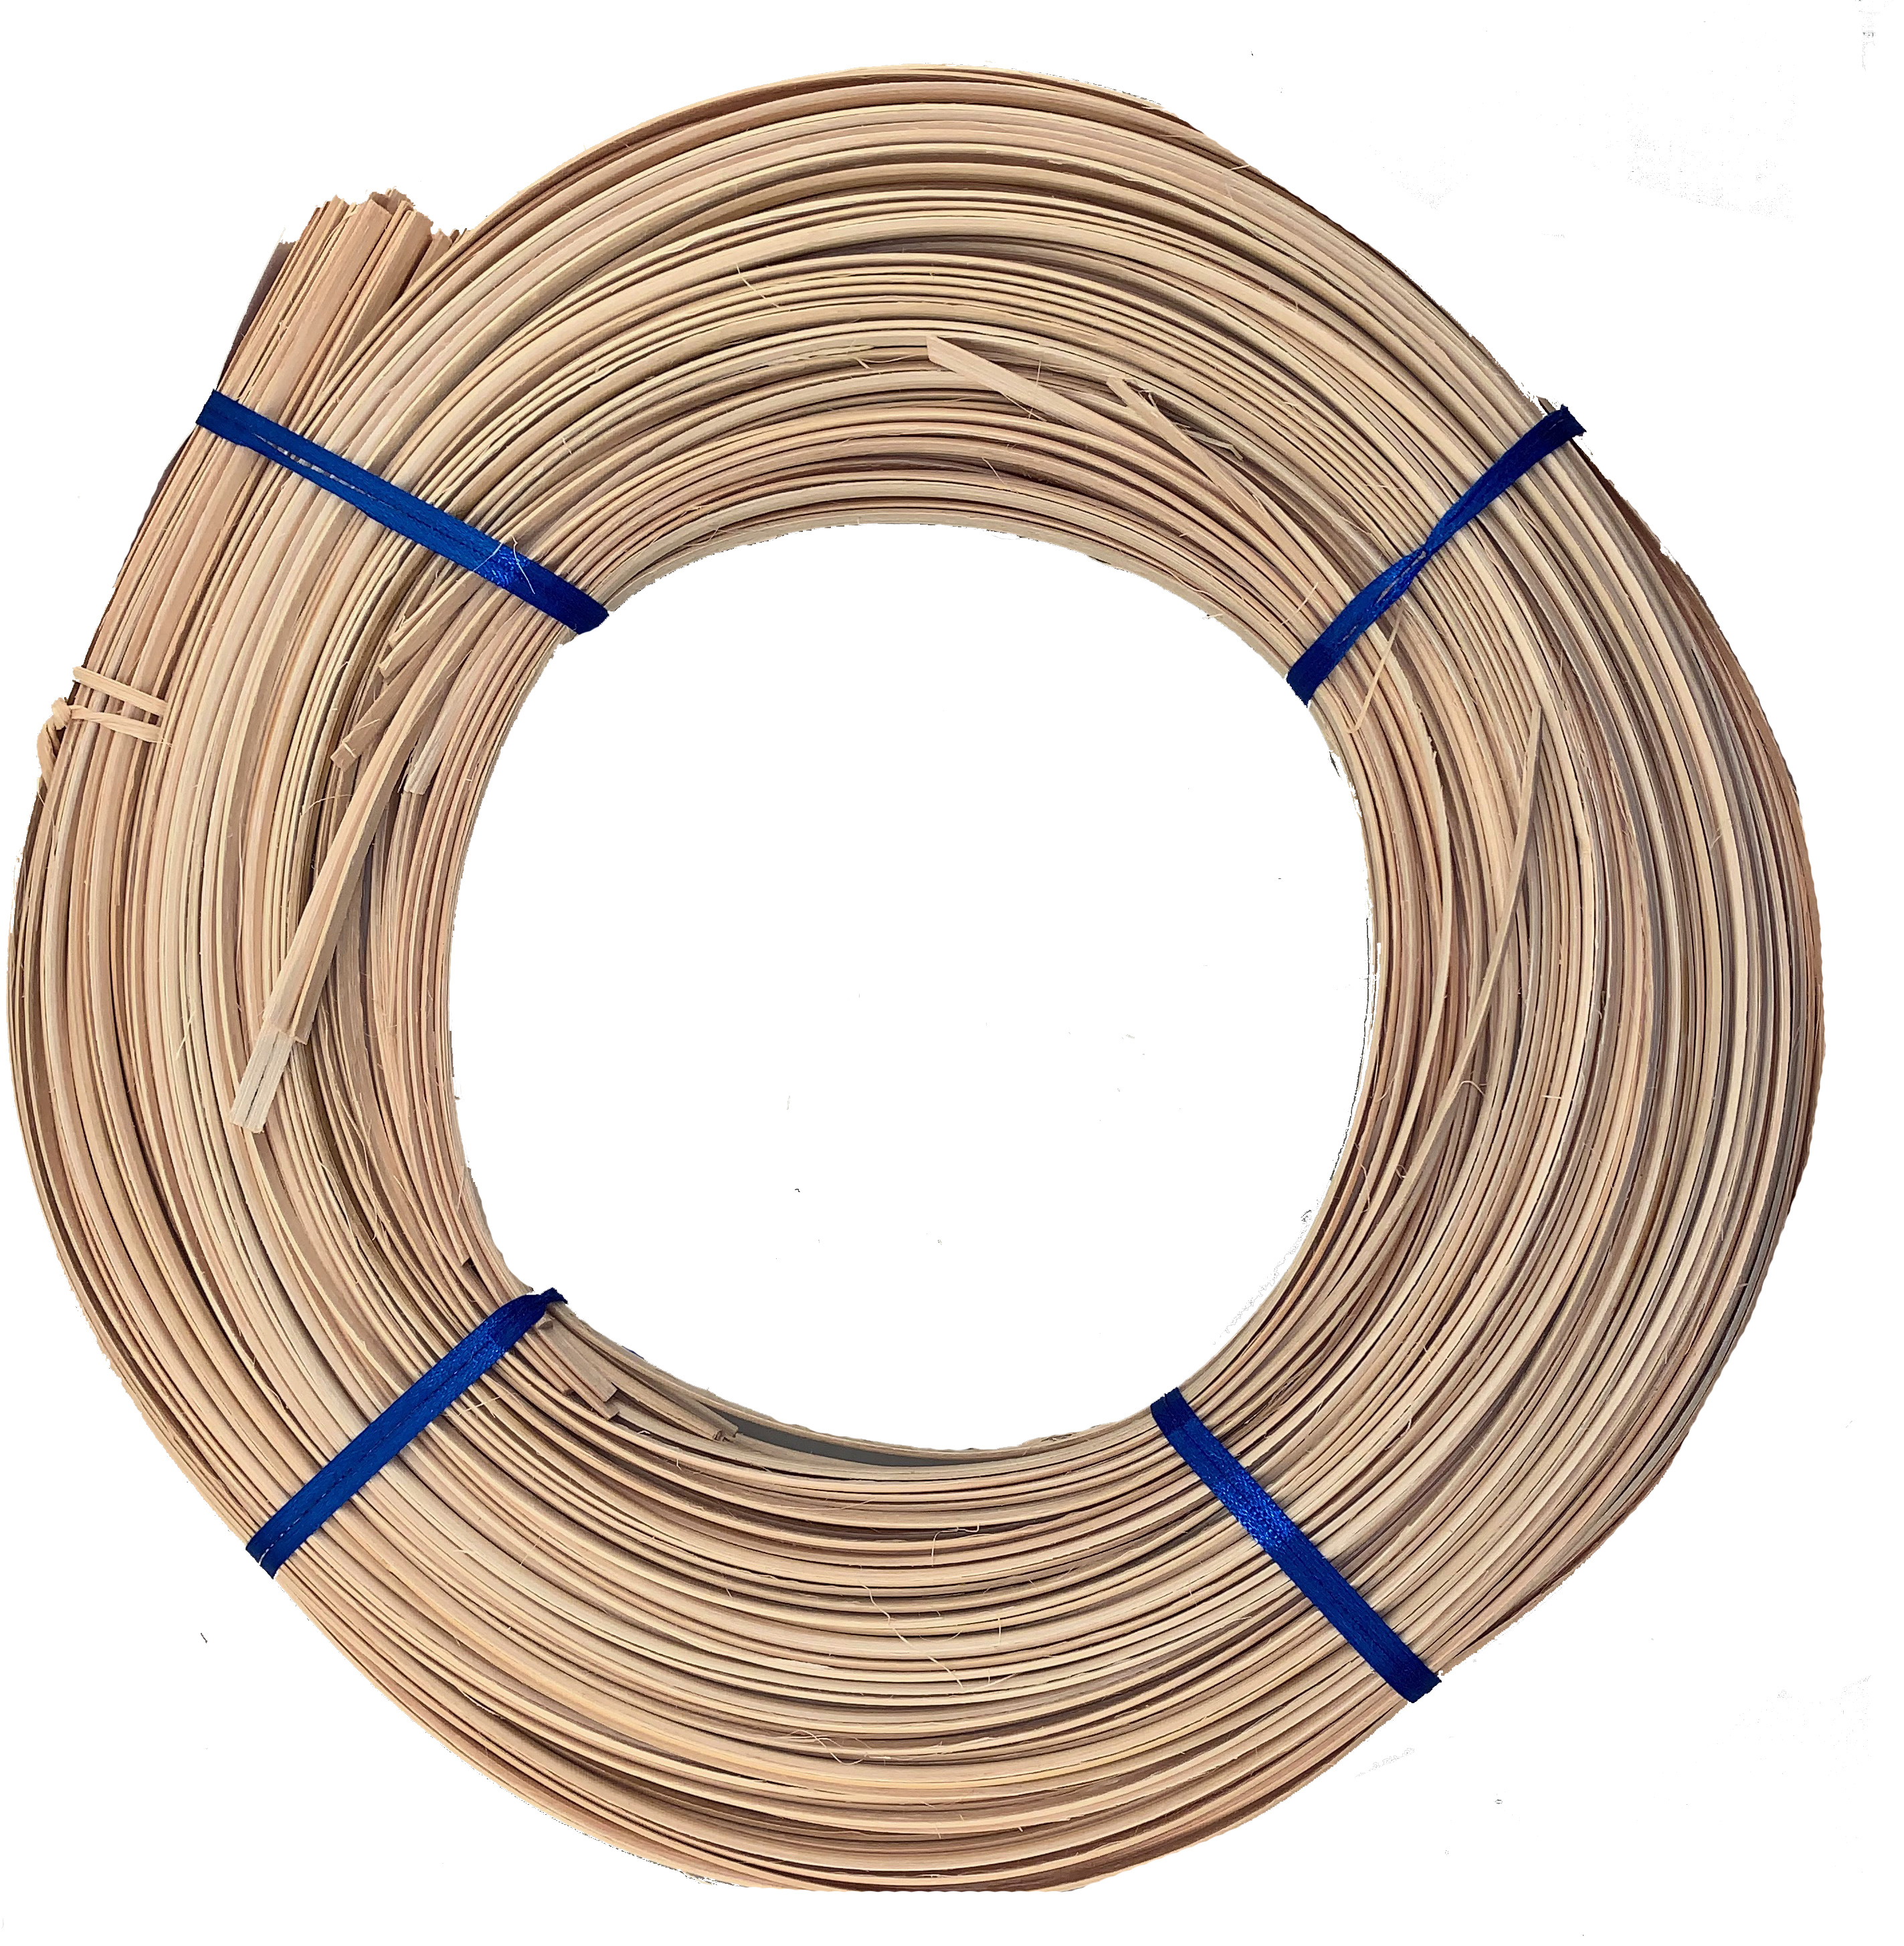 1/4 flat oval reed - 232 ft